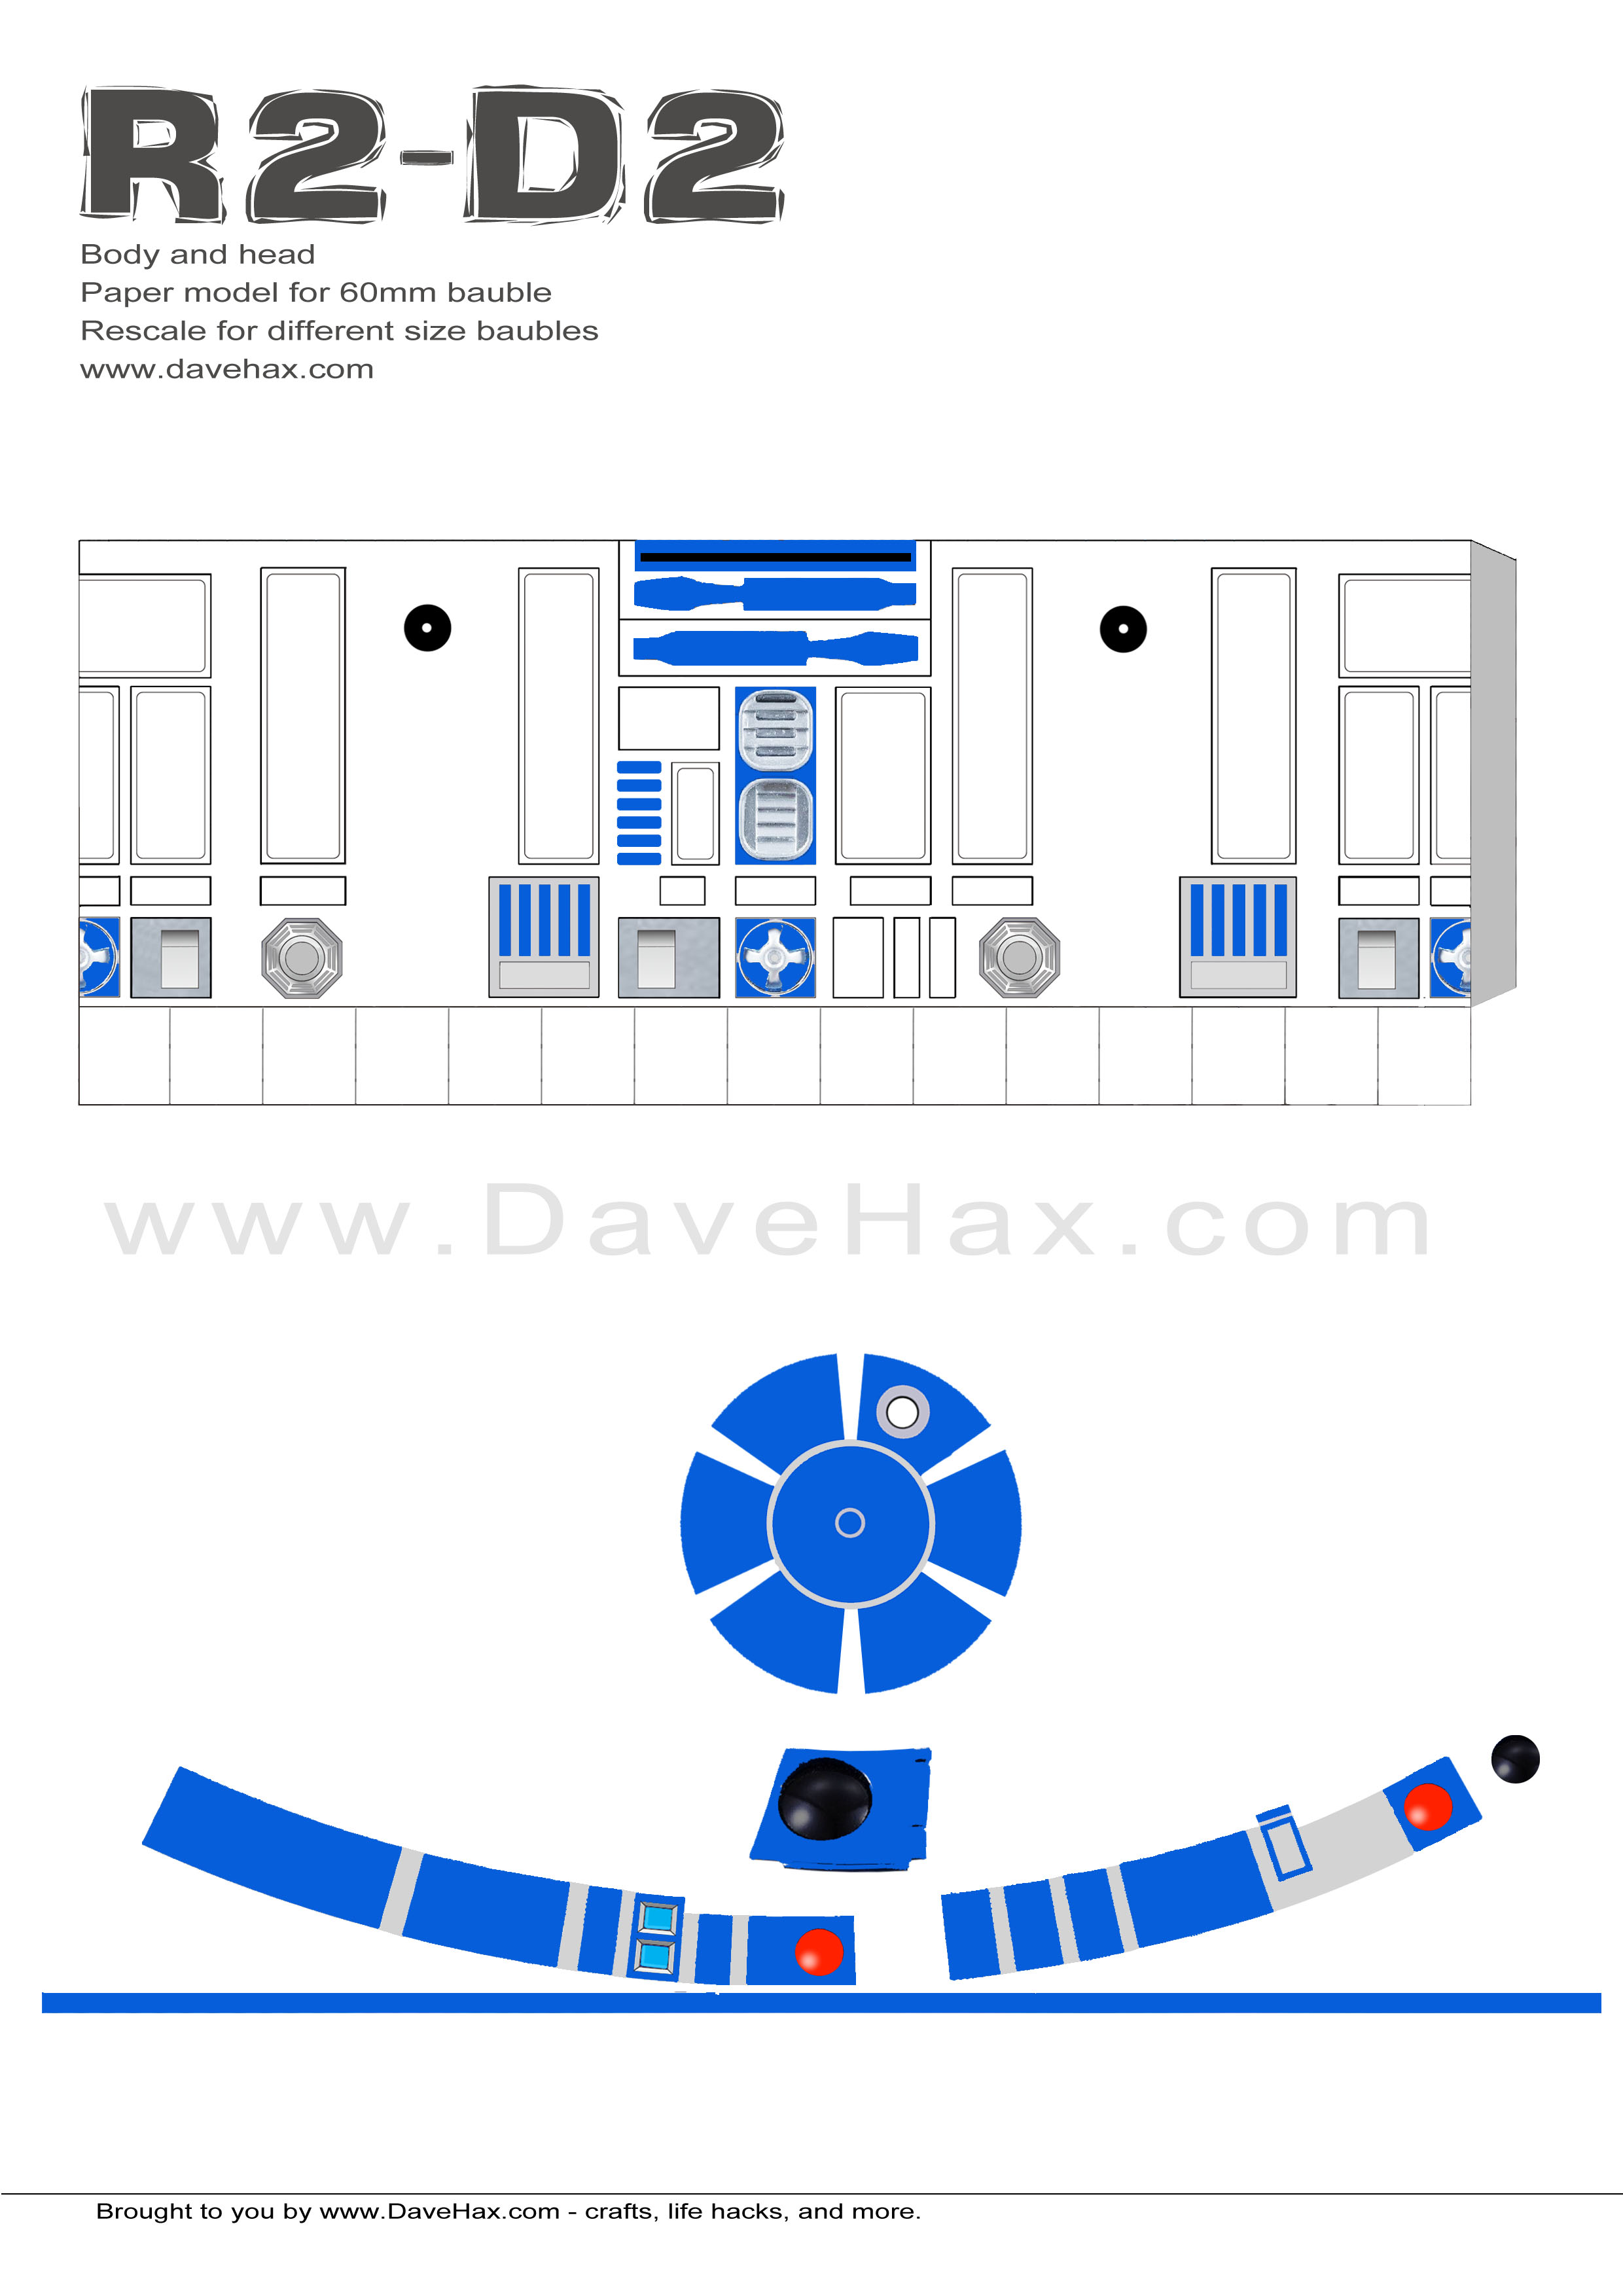 Dave Hax's R2D2 Body and Head